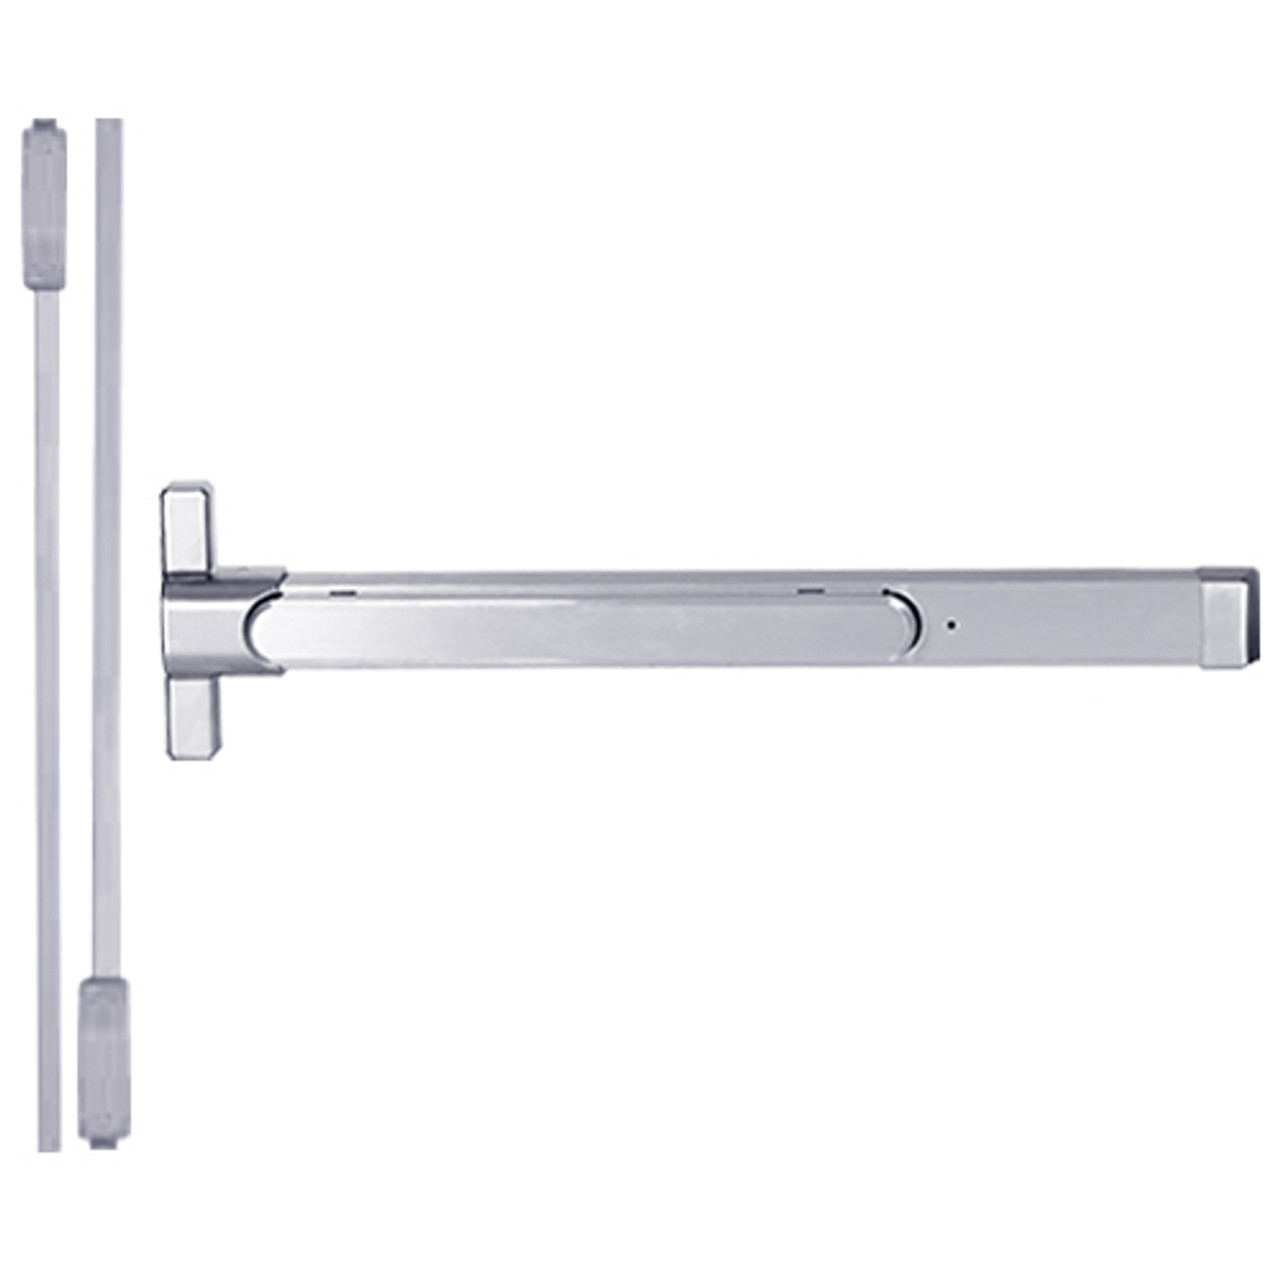 QED217-36-7-626 Stanley QED200 Series Heavy Duty Narrow Stile Surface Vertical Rod Hex Dog Exit Device in Satin Chrome Finish